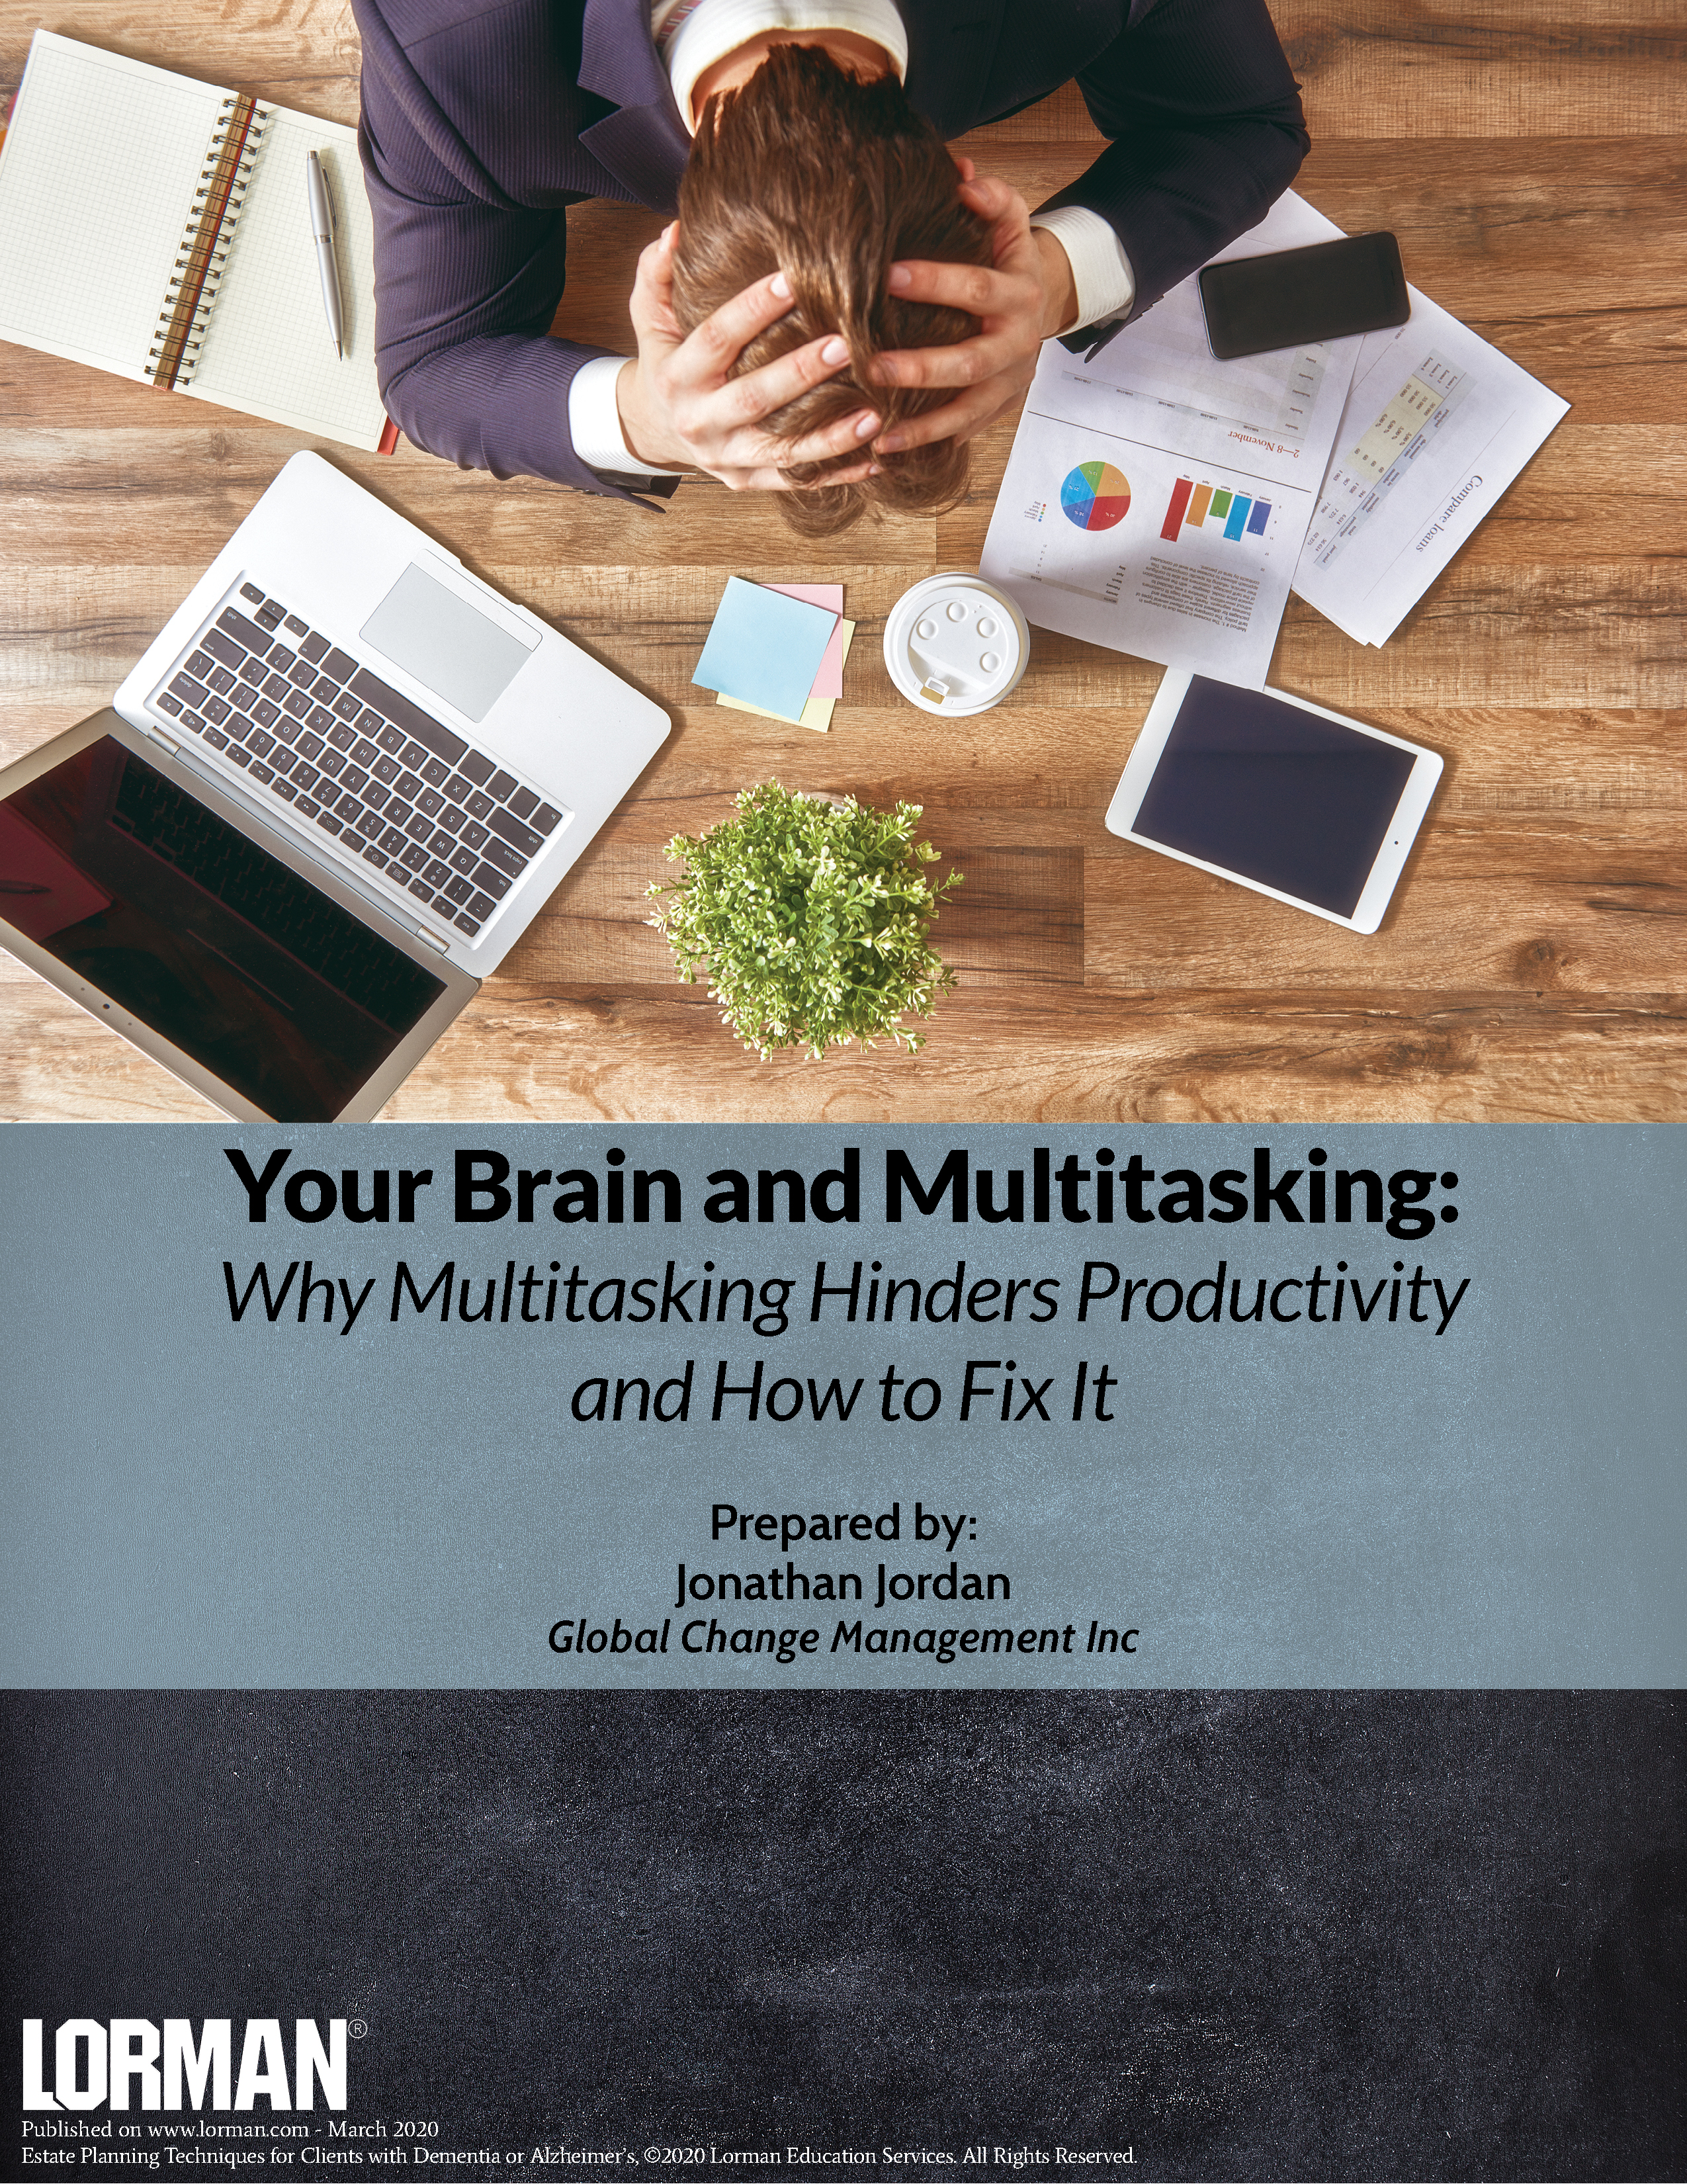 Your Brain and Multitasking